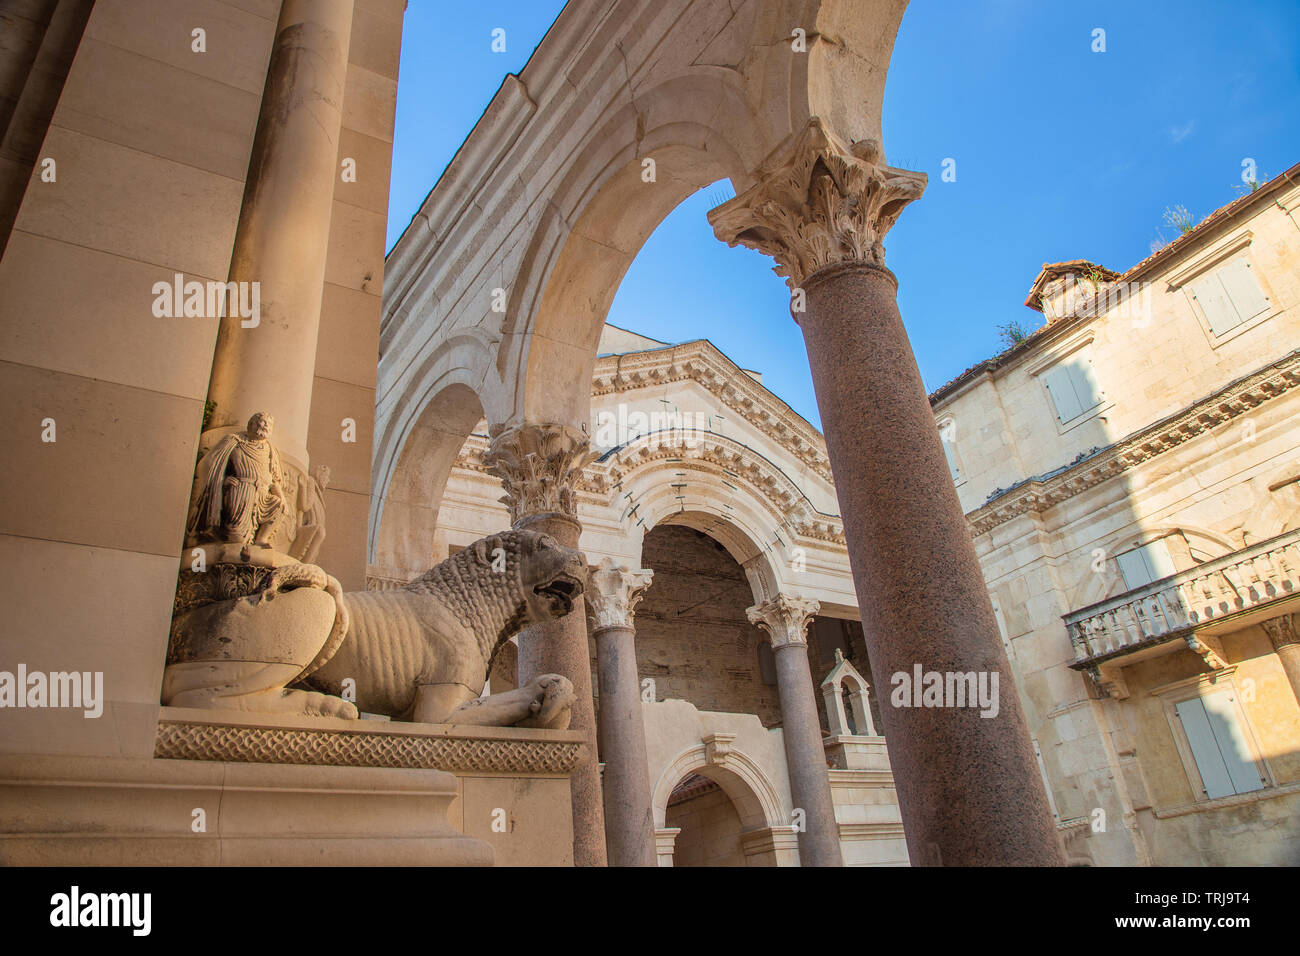 Split, Croatia, peristyle or peristil inside Diocletian Palace in the old town, statues of stone lions and arches from ancient Roman times Stock Photo